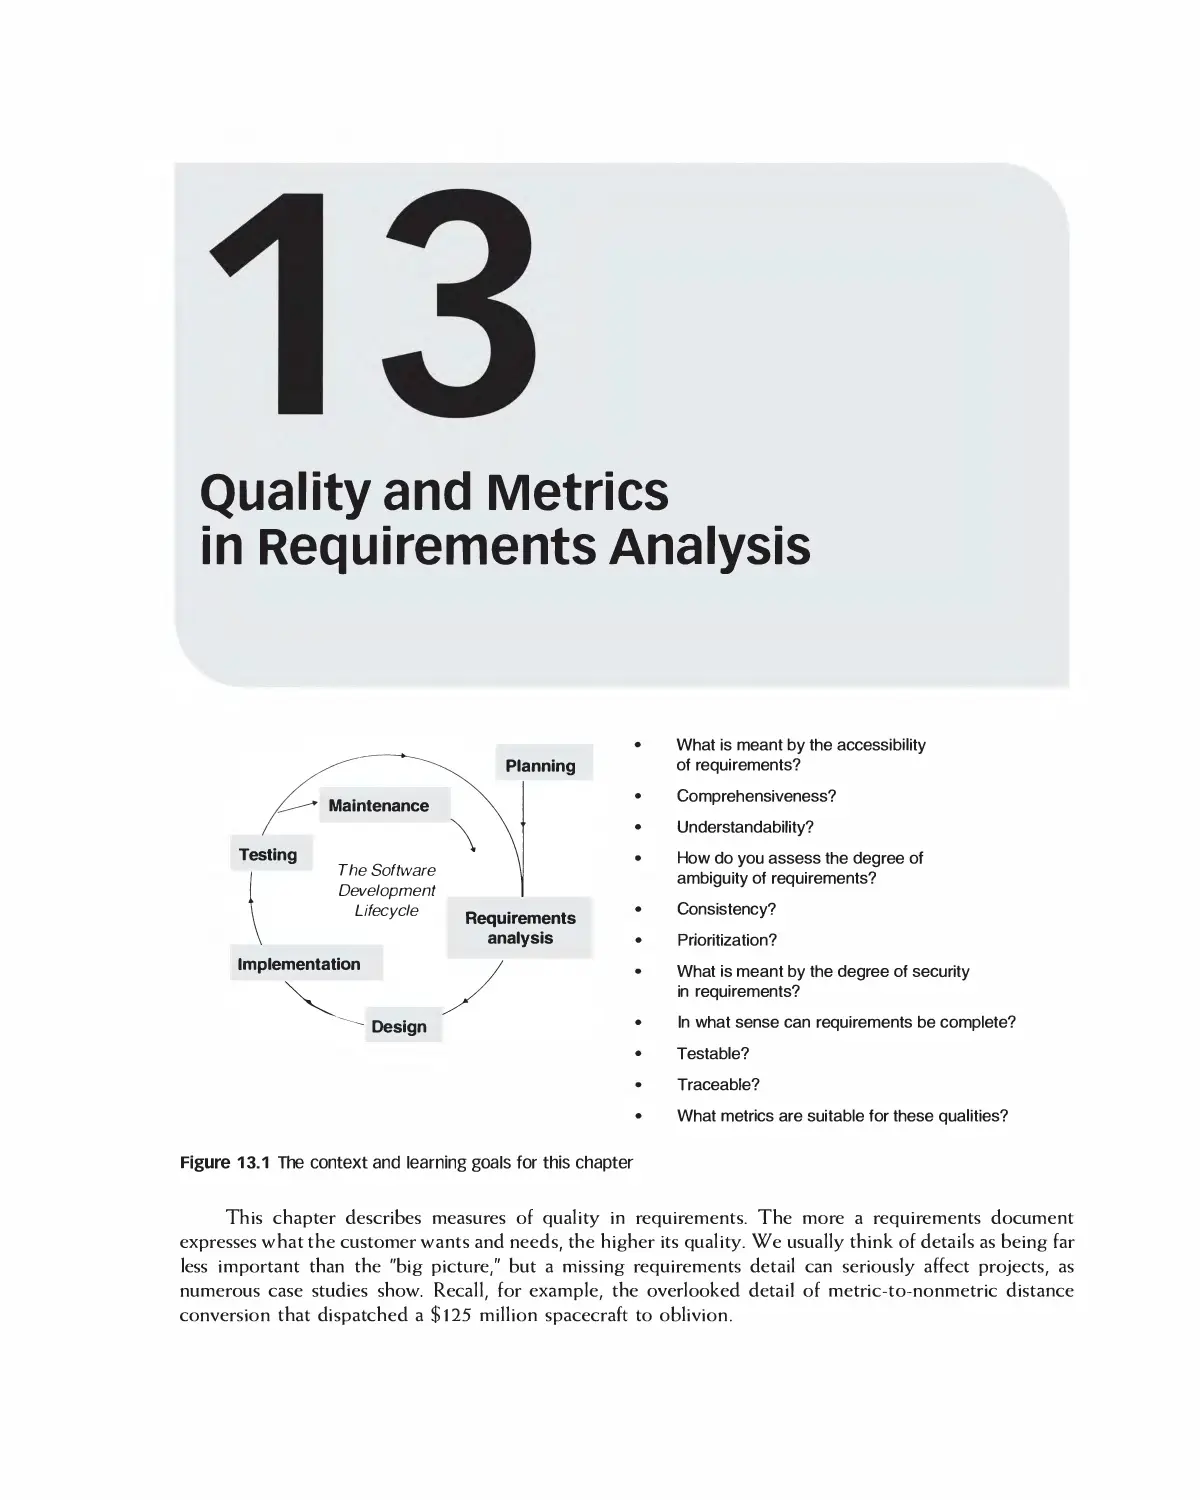 Chapter 13: Quality and Metrics in Requirements Analysis